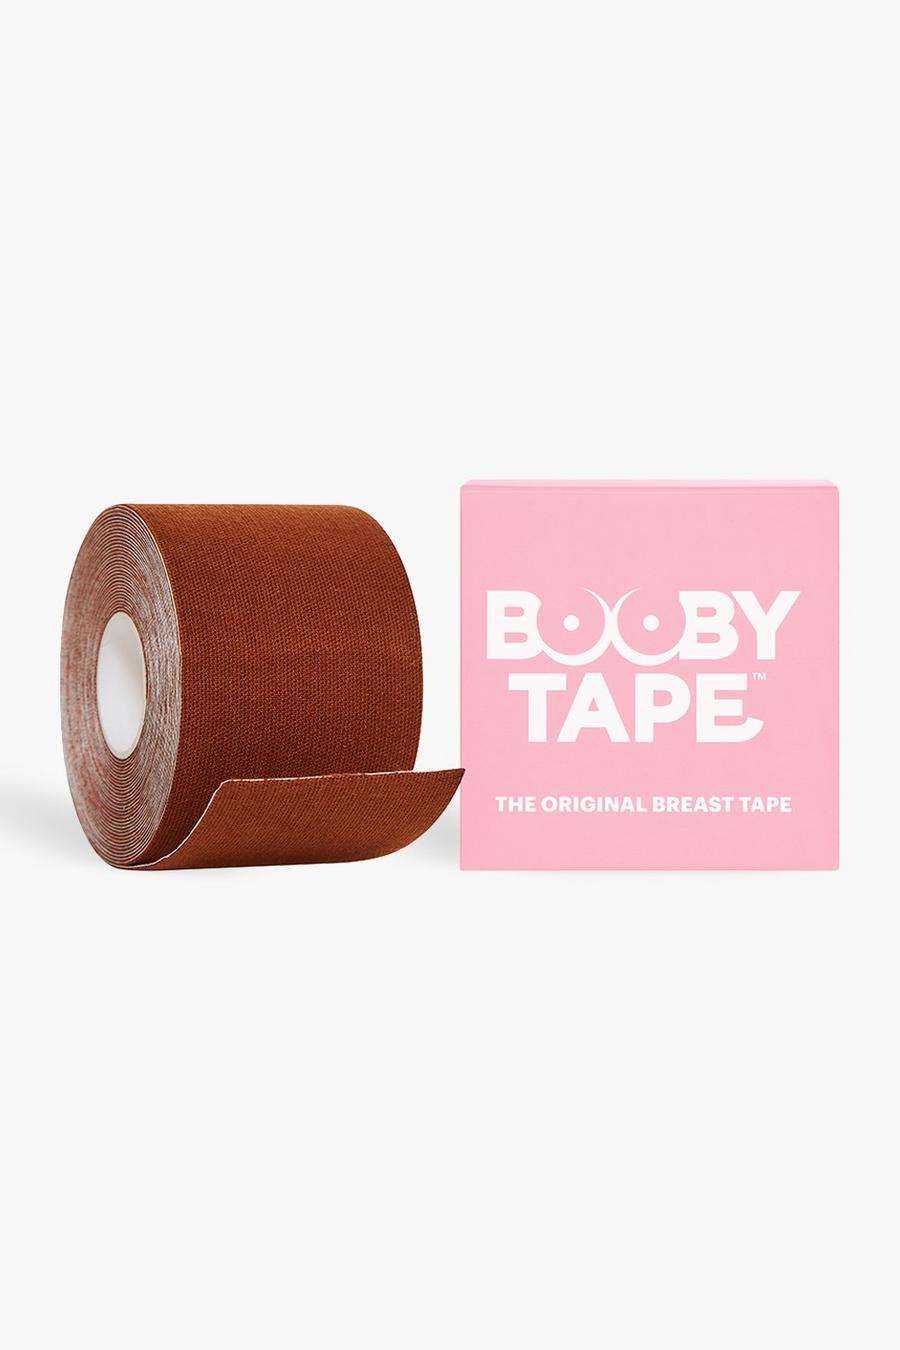 Booby Tape braun 5m Rolle image number 1